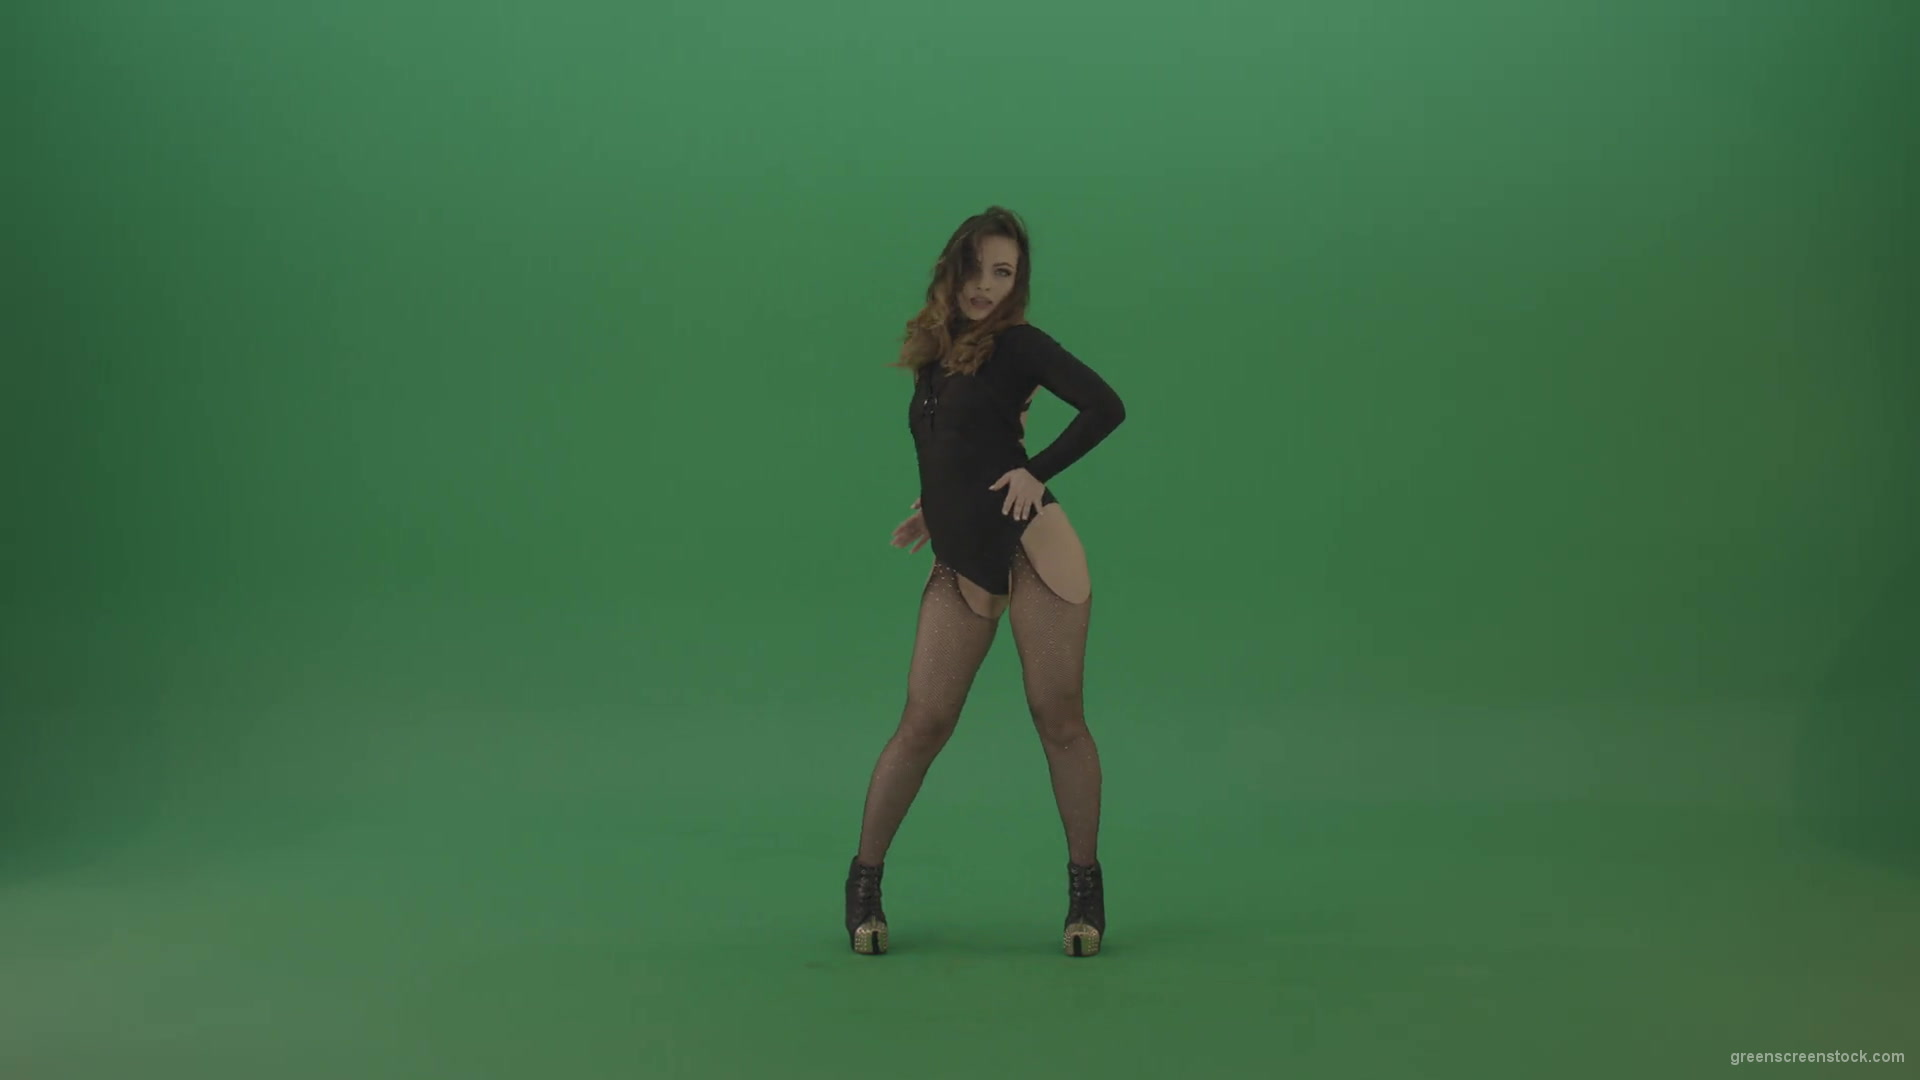 Go-Go-Girl-Dancing-and-shaking-the-ass-in-back-side-view-on-green-screen-1920_002 Green Screen Stock